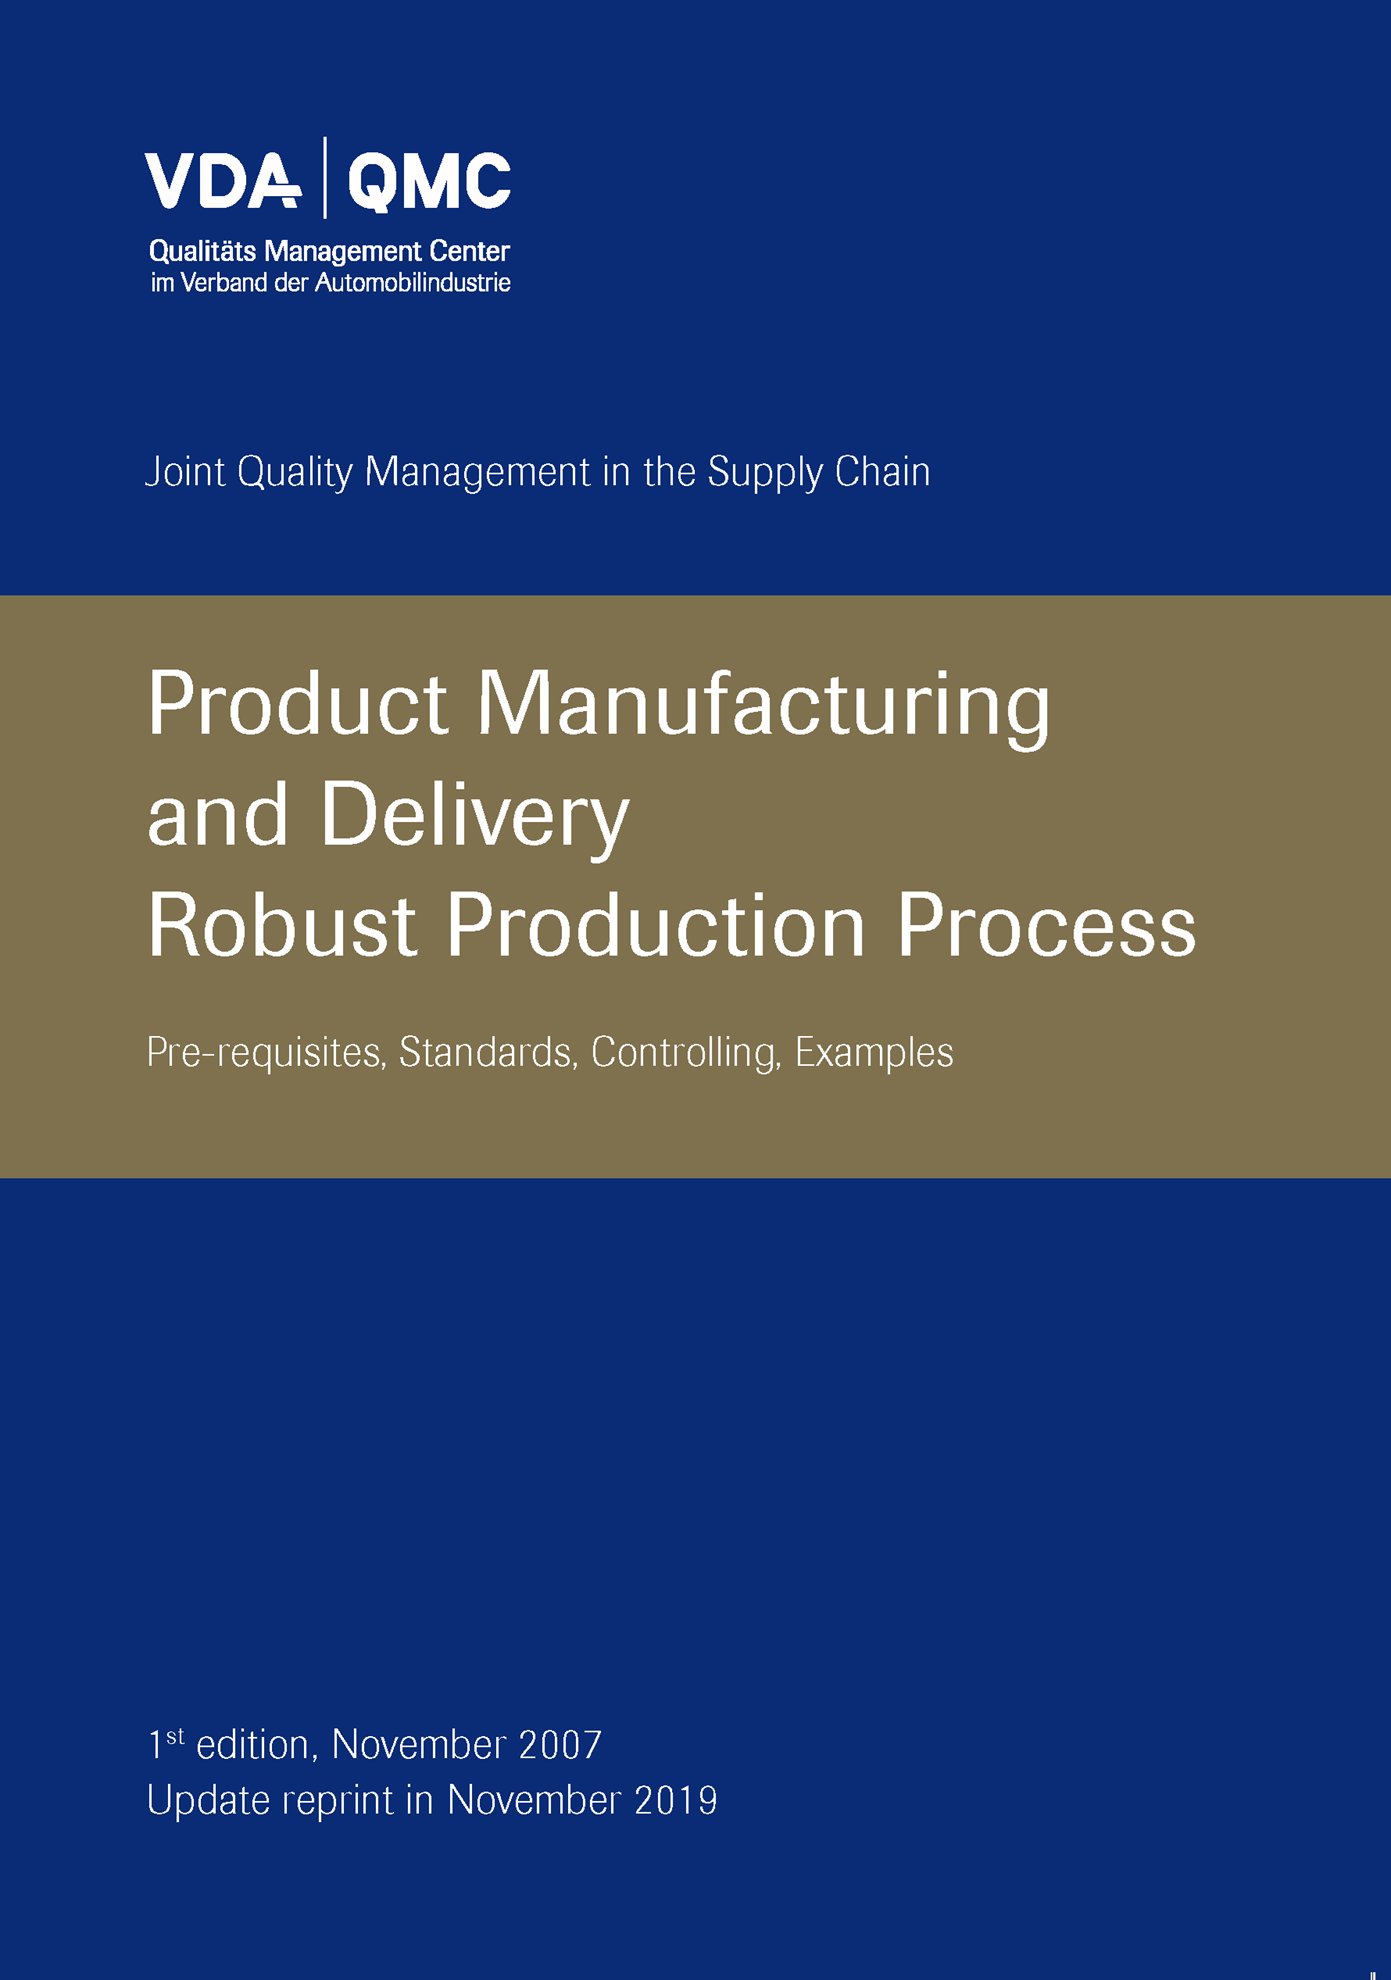 Náhľad  VDA Product Manufacturing and Delivery
 · Robust Production Process
 Prerequisites, Standards, Controlling, Examples
 1st edition November 2007 - Updated reprint, November 2019 1.11.2019